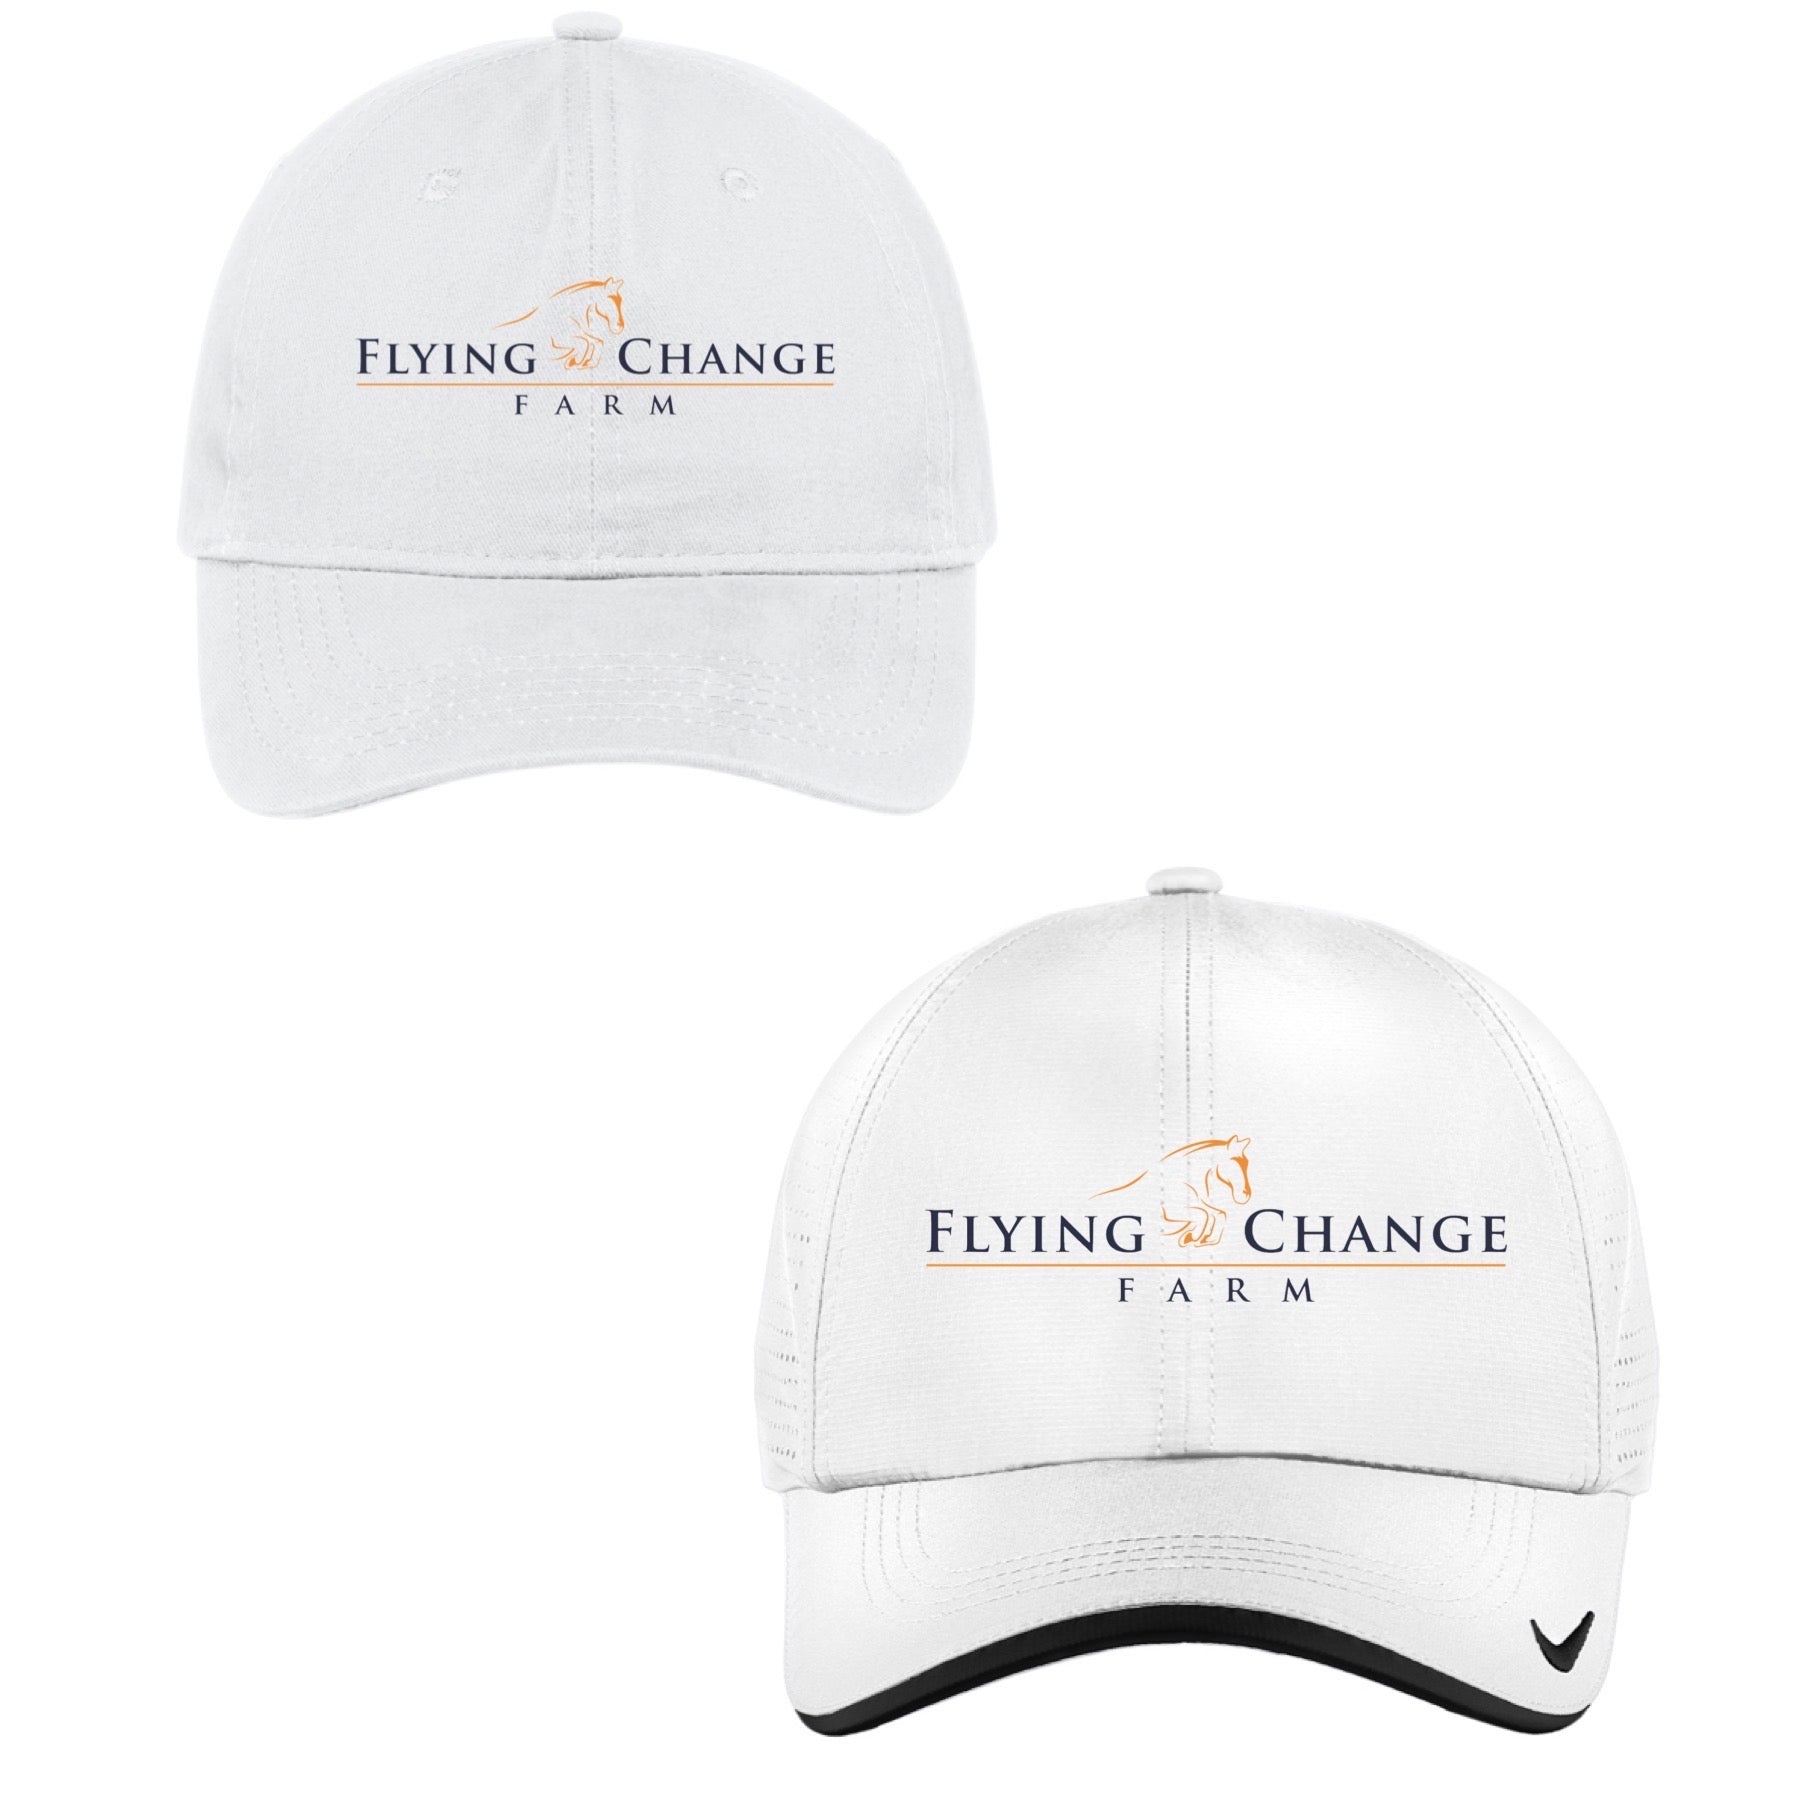 Equestrian Team Apparel Flying Change Farm Baseball Cap equestrian team apparel online tack store mobile tack store custom farm apparel custom show stable clothing equestrian lifestyle horse show clothing riding clothes horses equestrian tack store